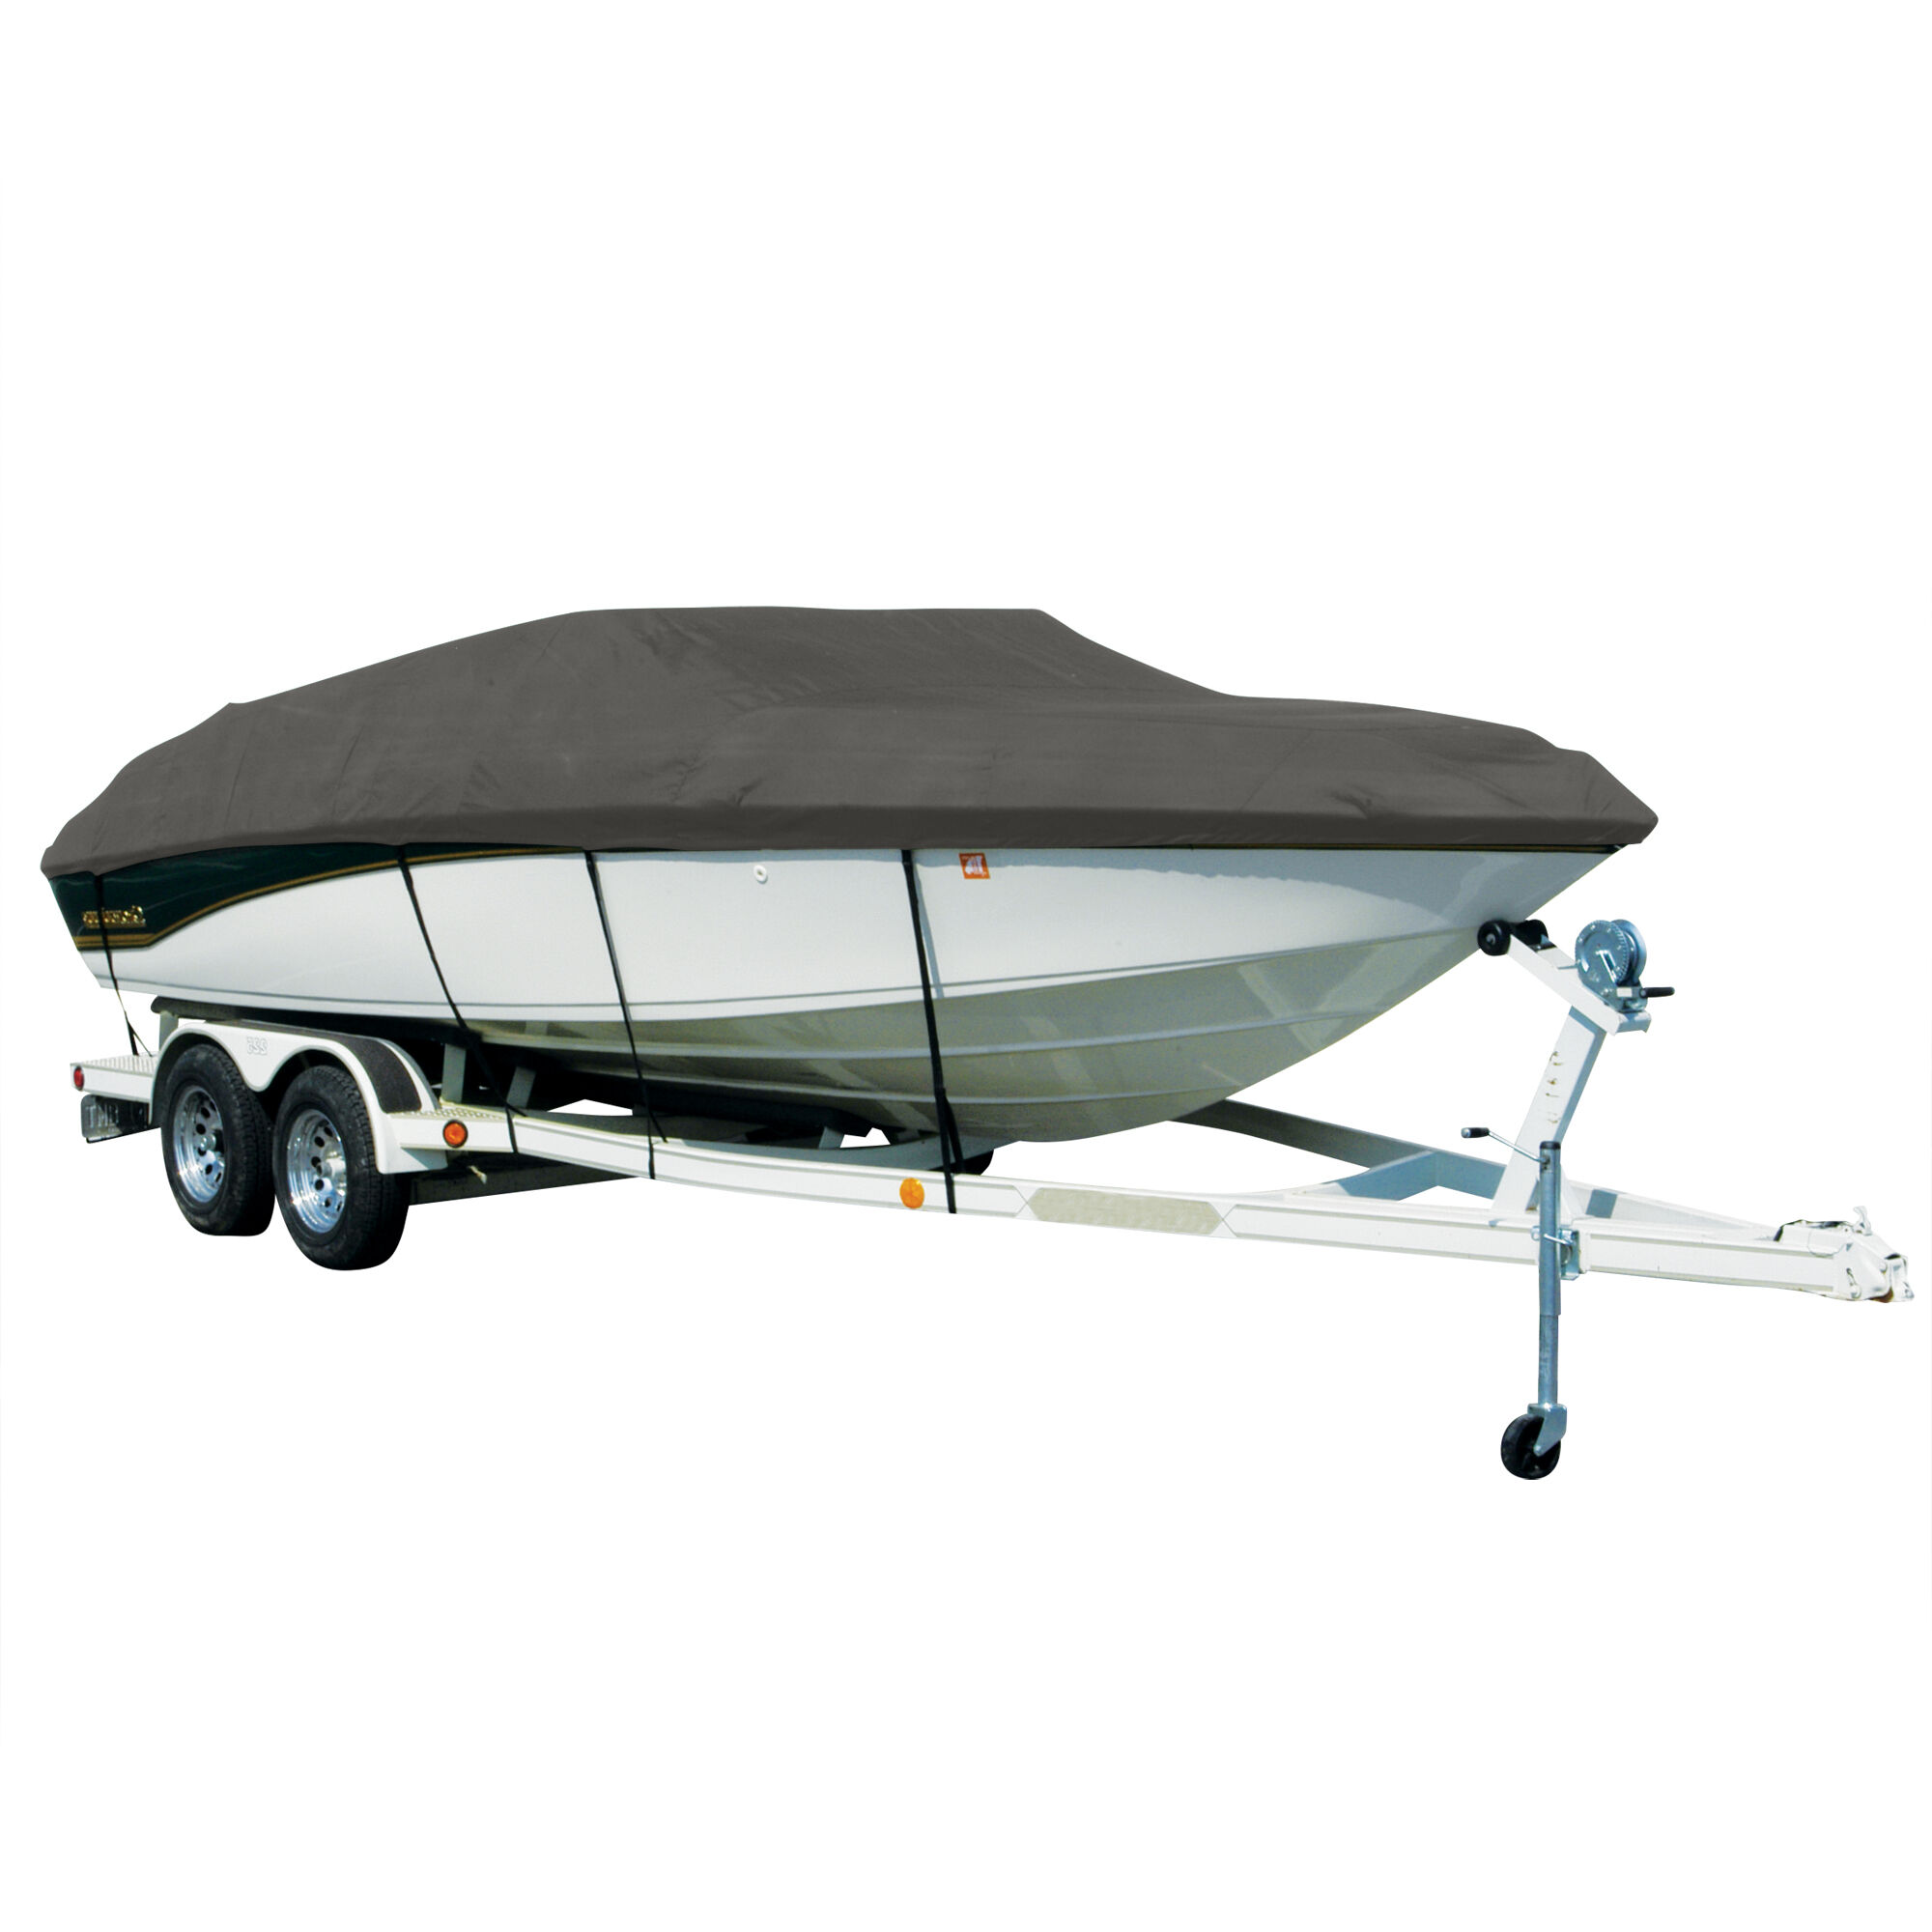 Covermate Exact Fit Sharkskin Boat Cover For Supreme 19 Cs Does Not Cover PLATFORMm in Charcoal